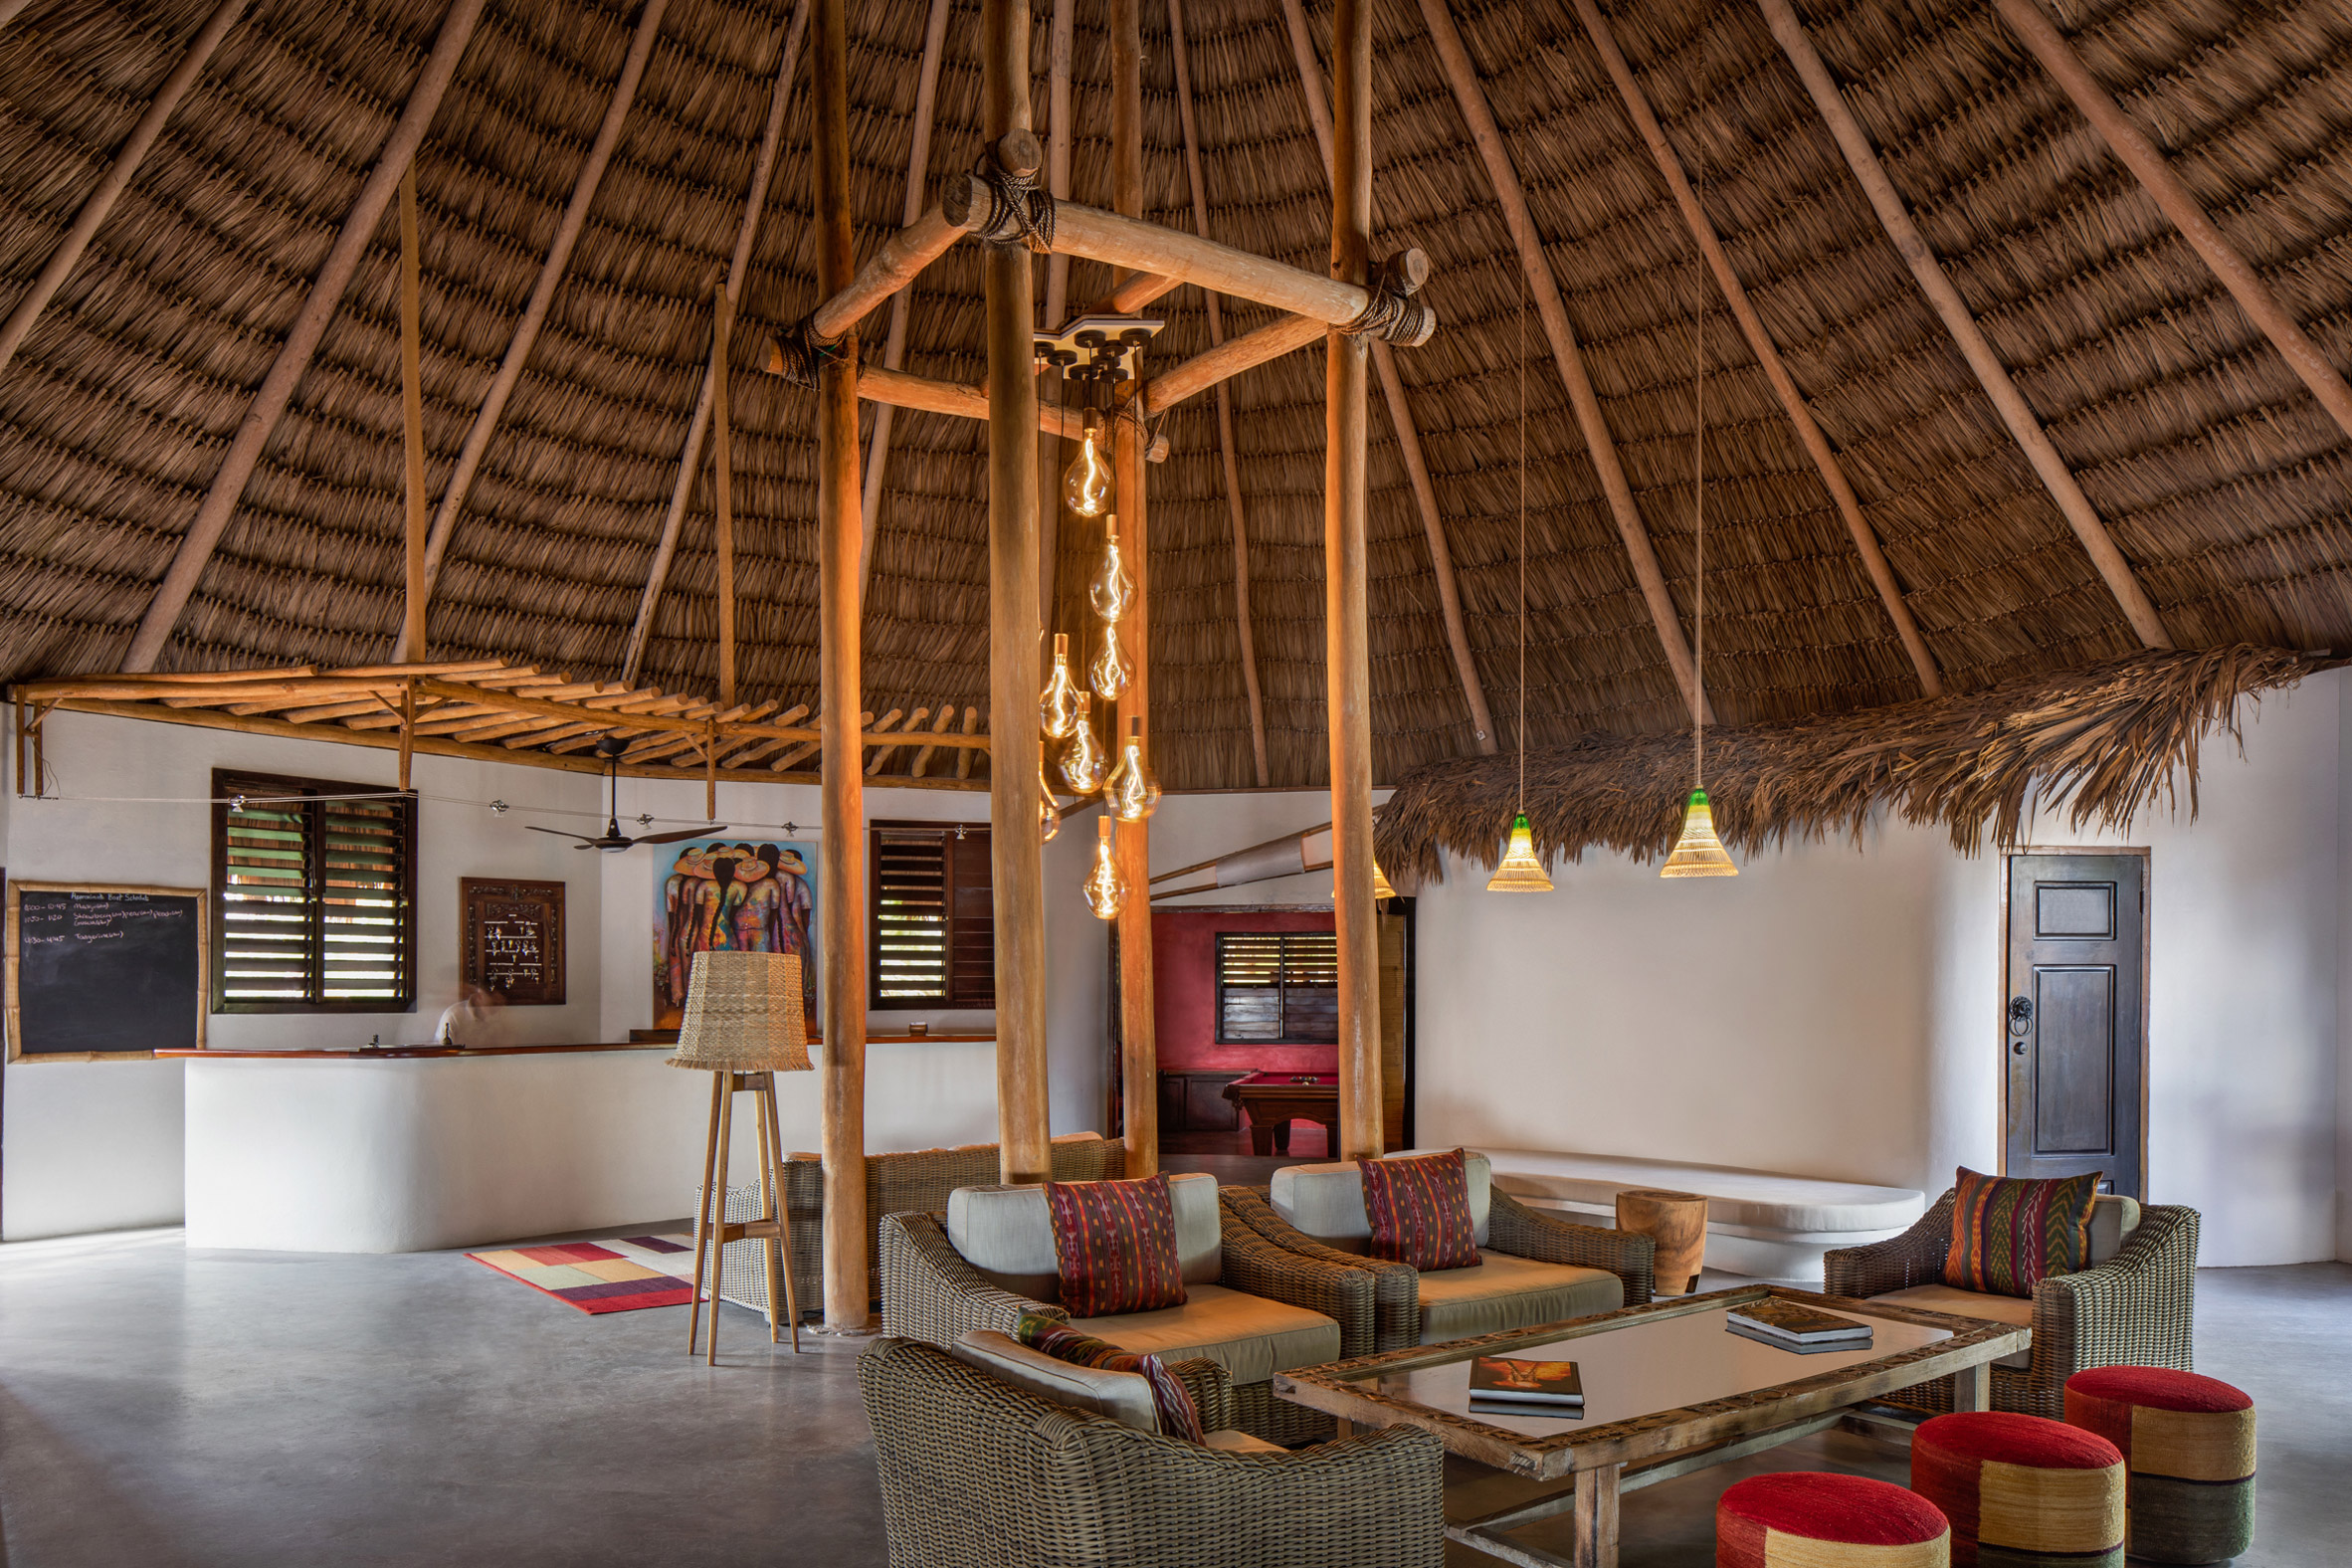 Matachica Hotel by Byron and Dexter Peart